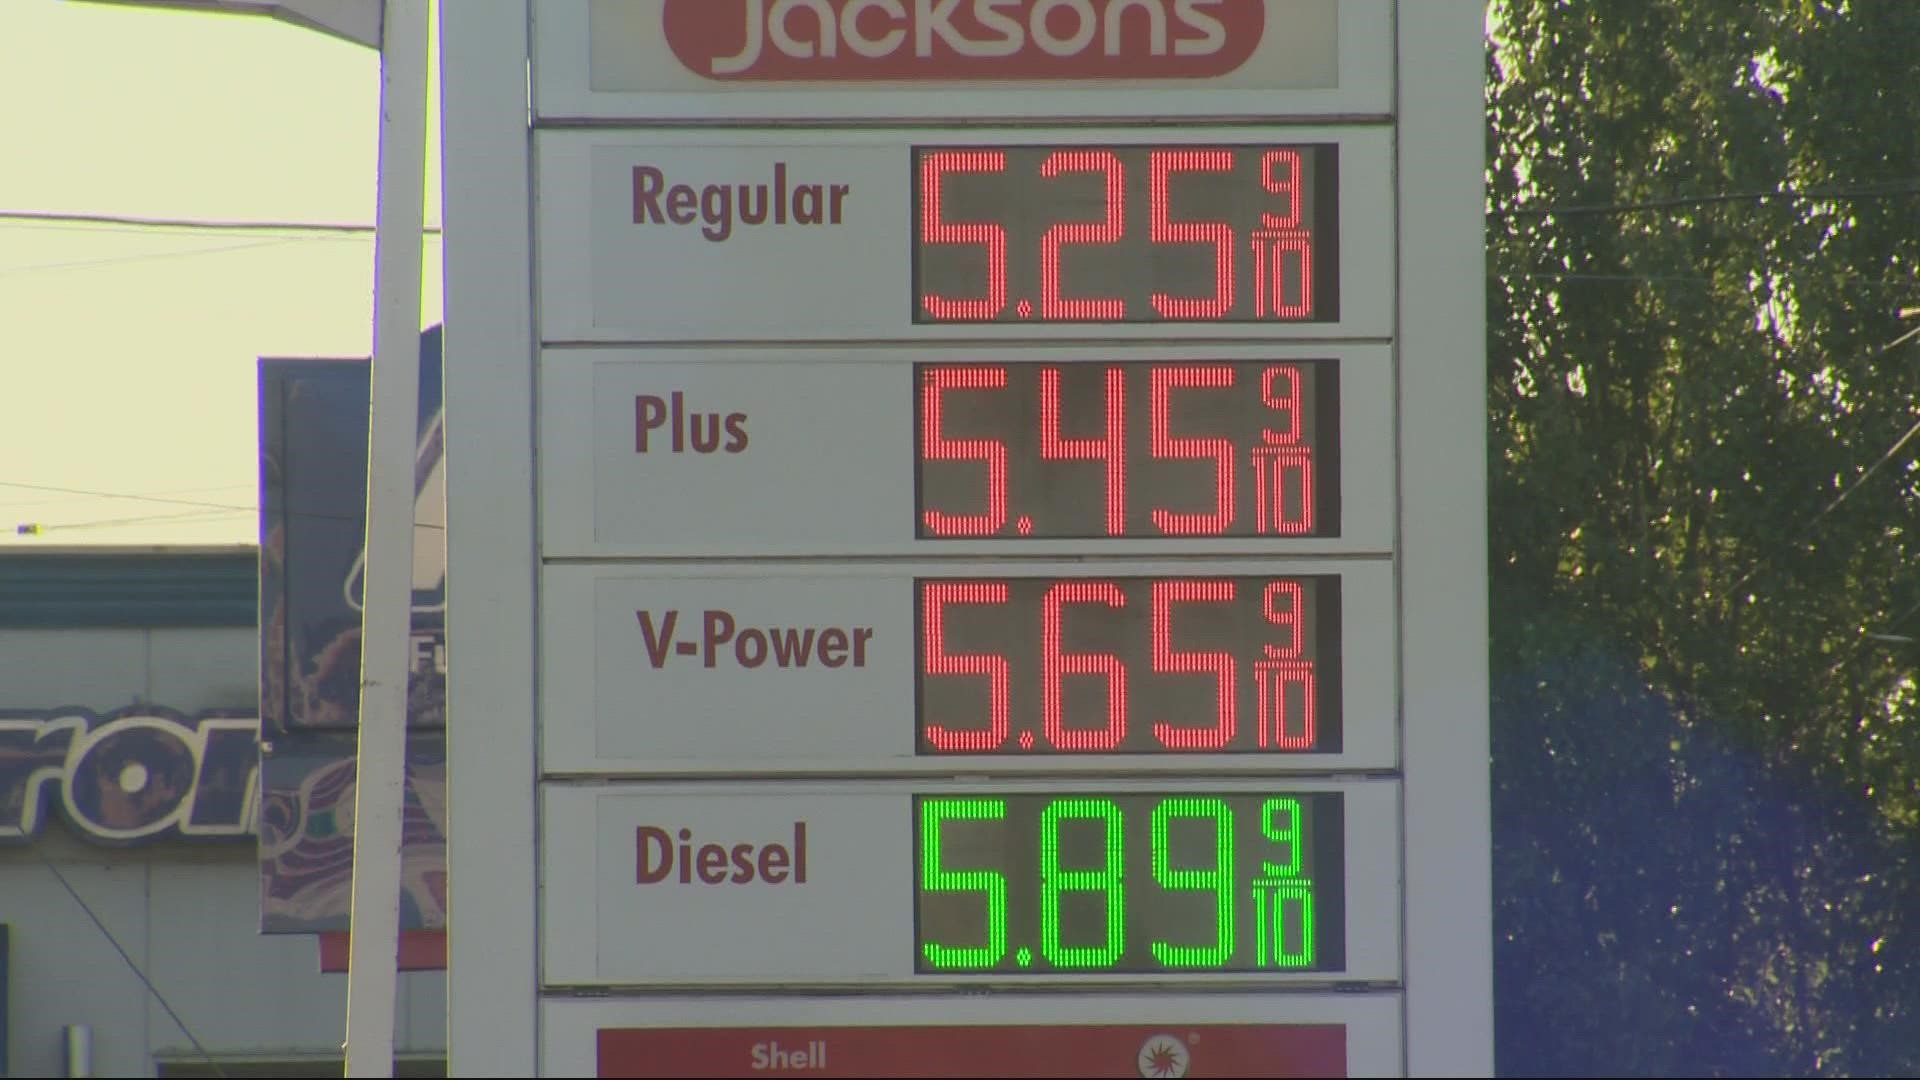 After weeks of decline, gas prices are on the rise again in Oregon and Washington, outpacing the rest of the country.